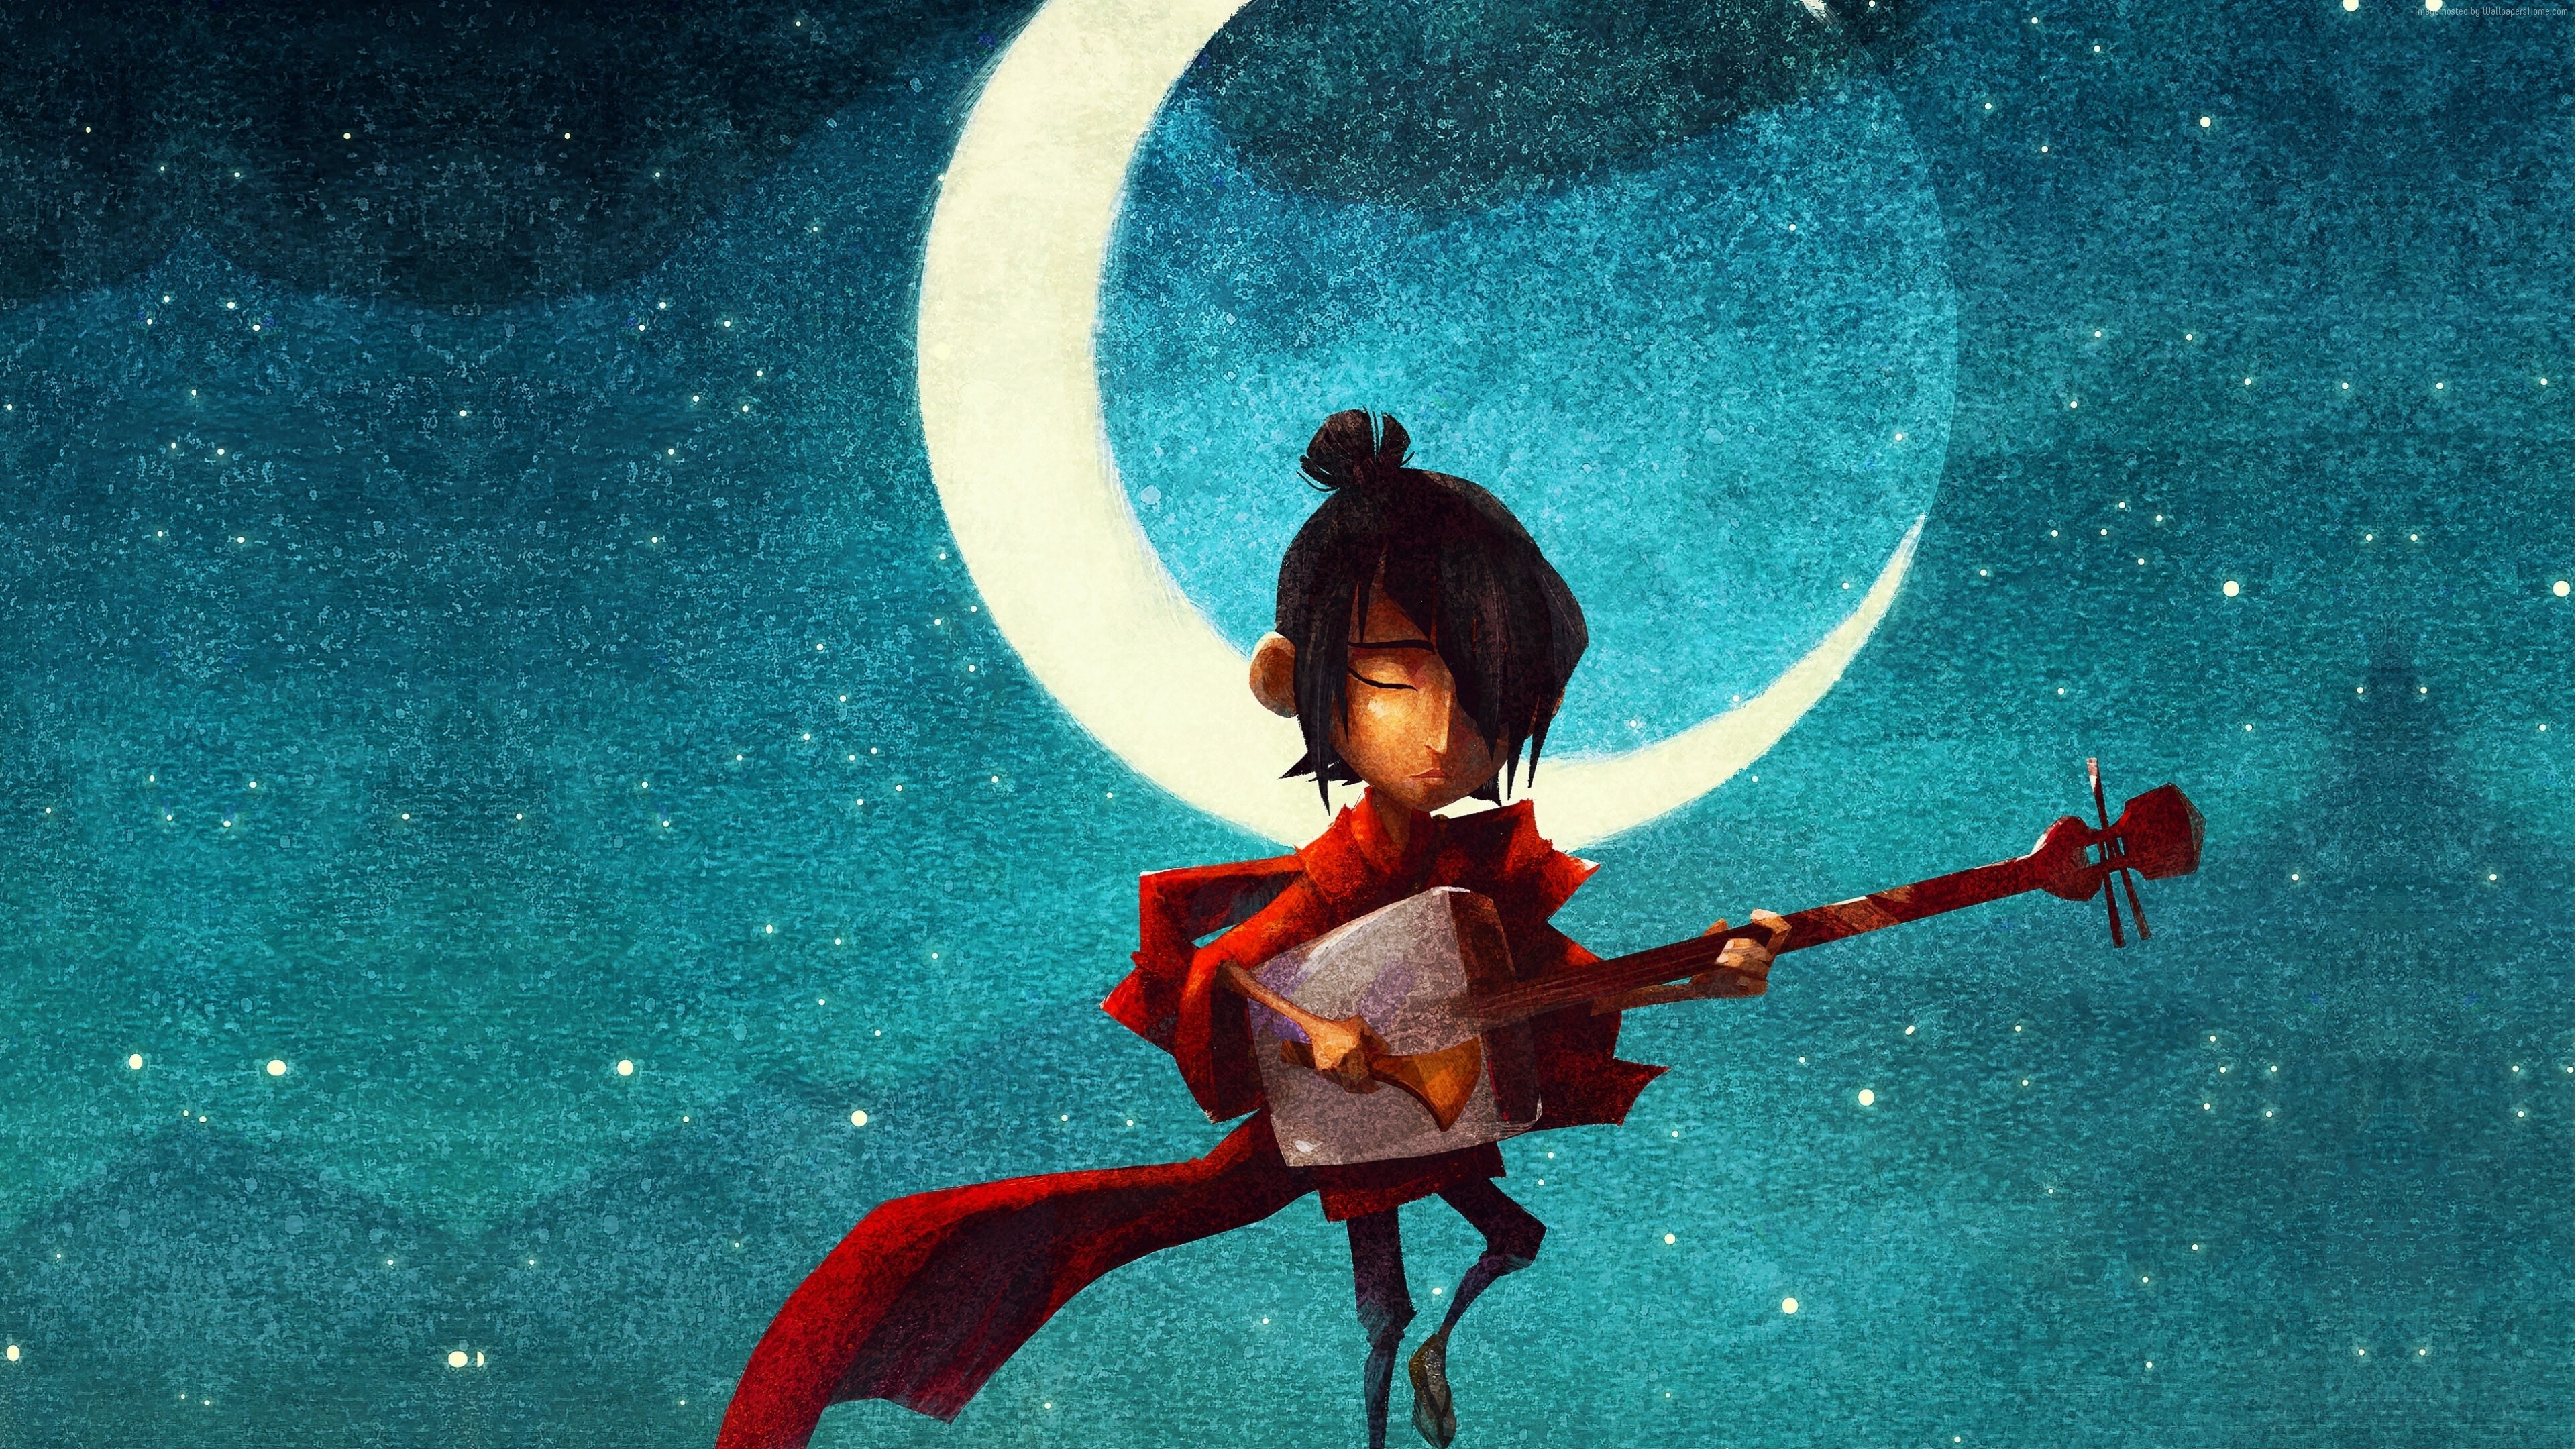 Kubo and the Two Strings: A 2016 American stop-motion animated action fantasy film produced by Laika. 3840x2160 4K Background.